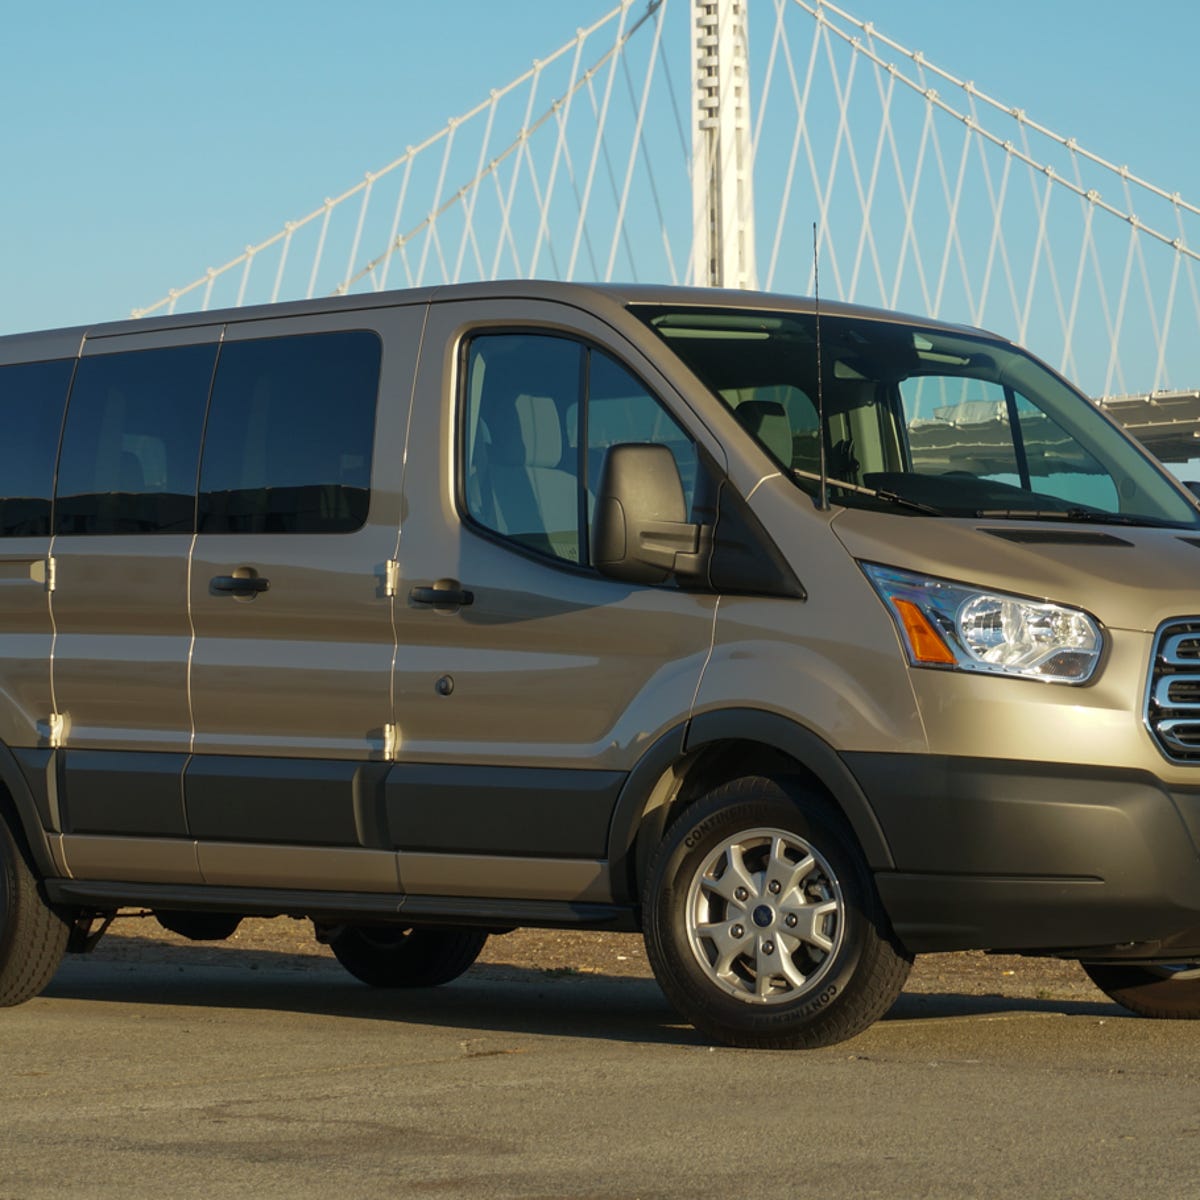 Форд транзит 20. Ford Transit 2015. Ford Transit 150. Ford Transit 150l. Ford Transit van 2015.